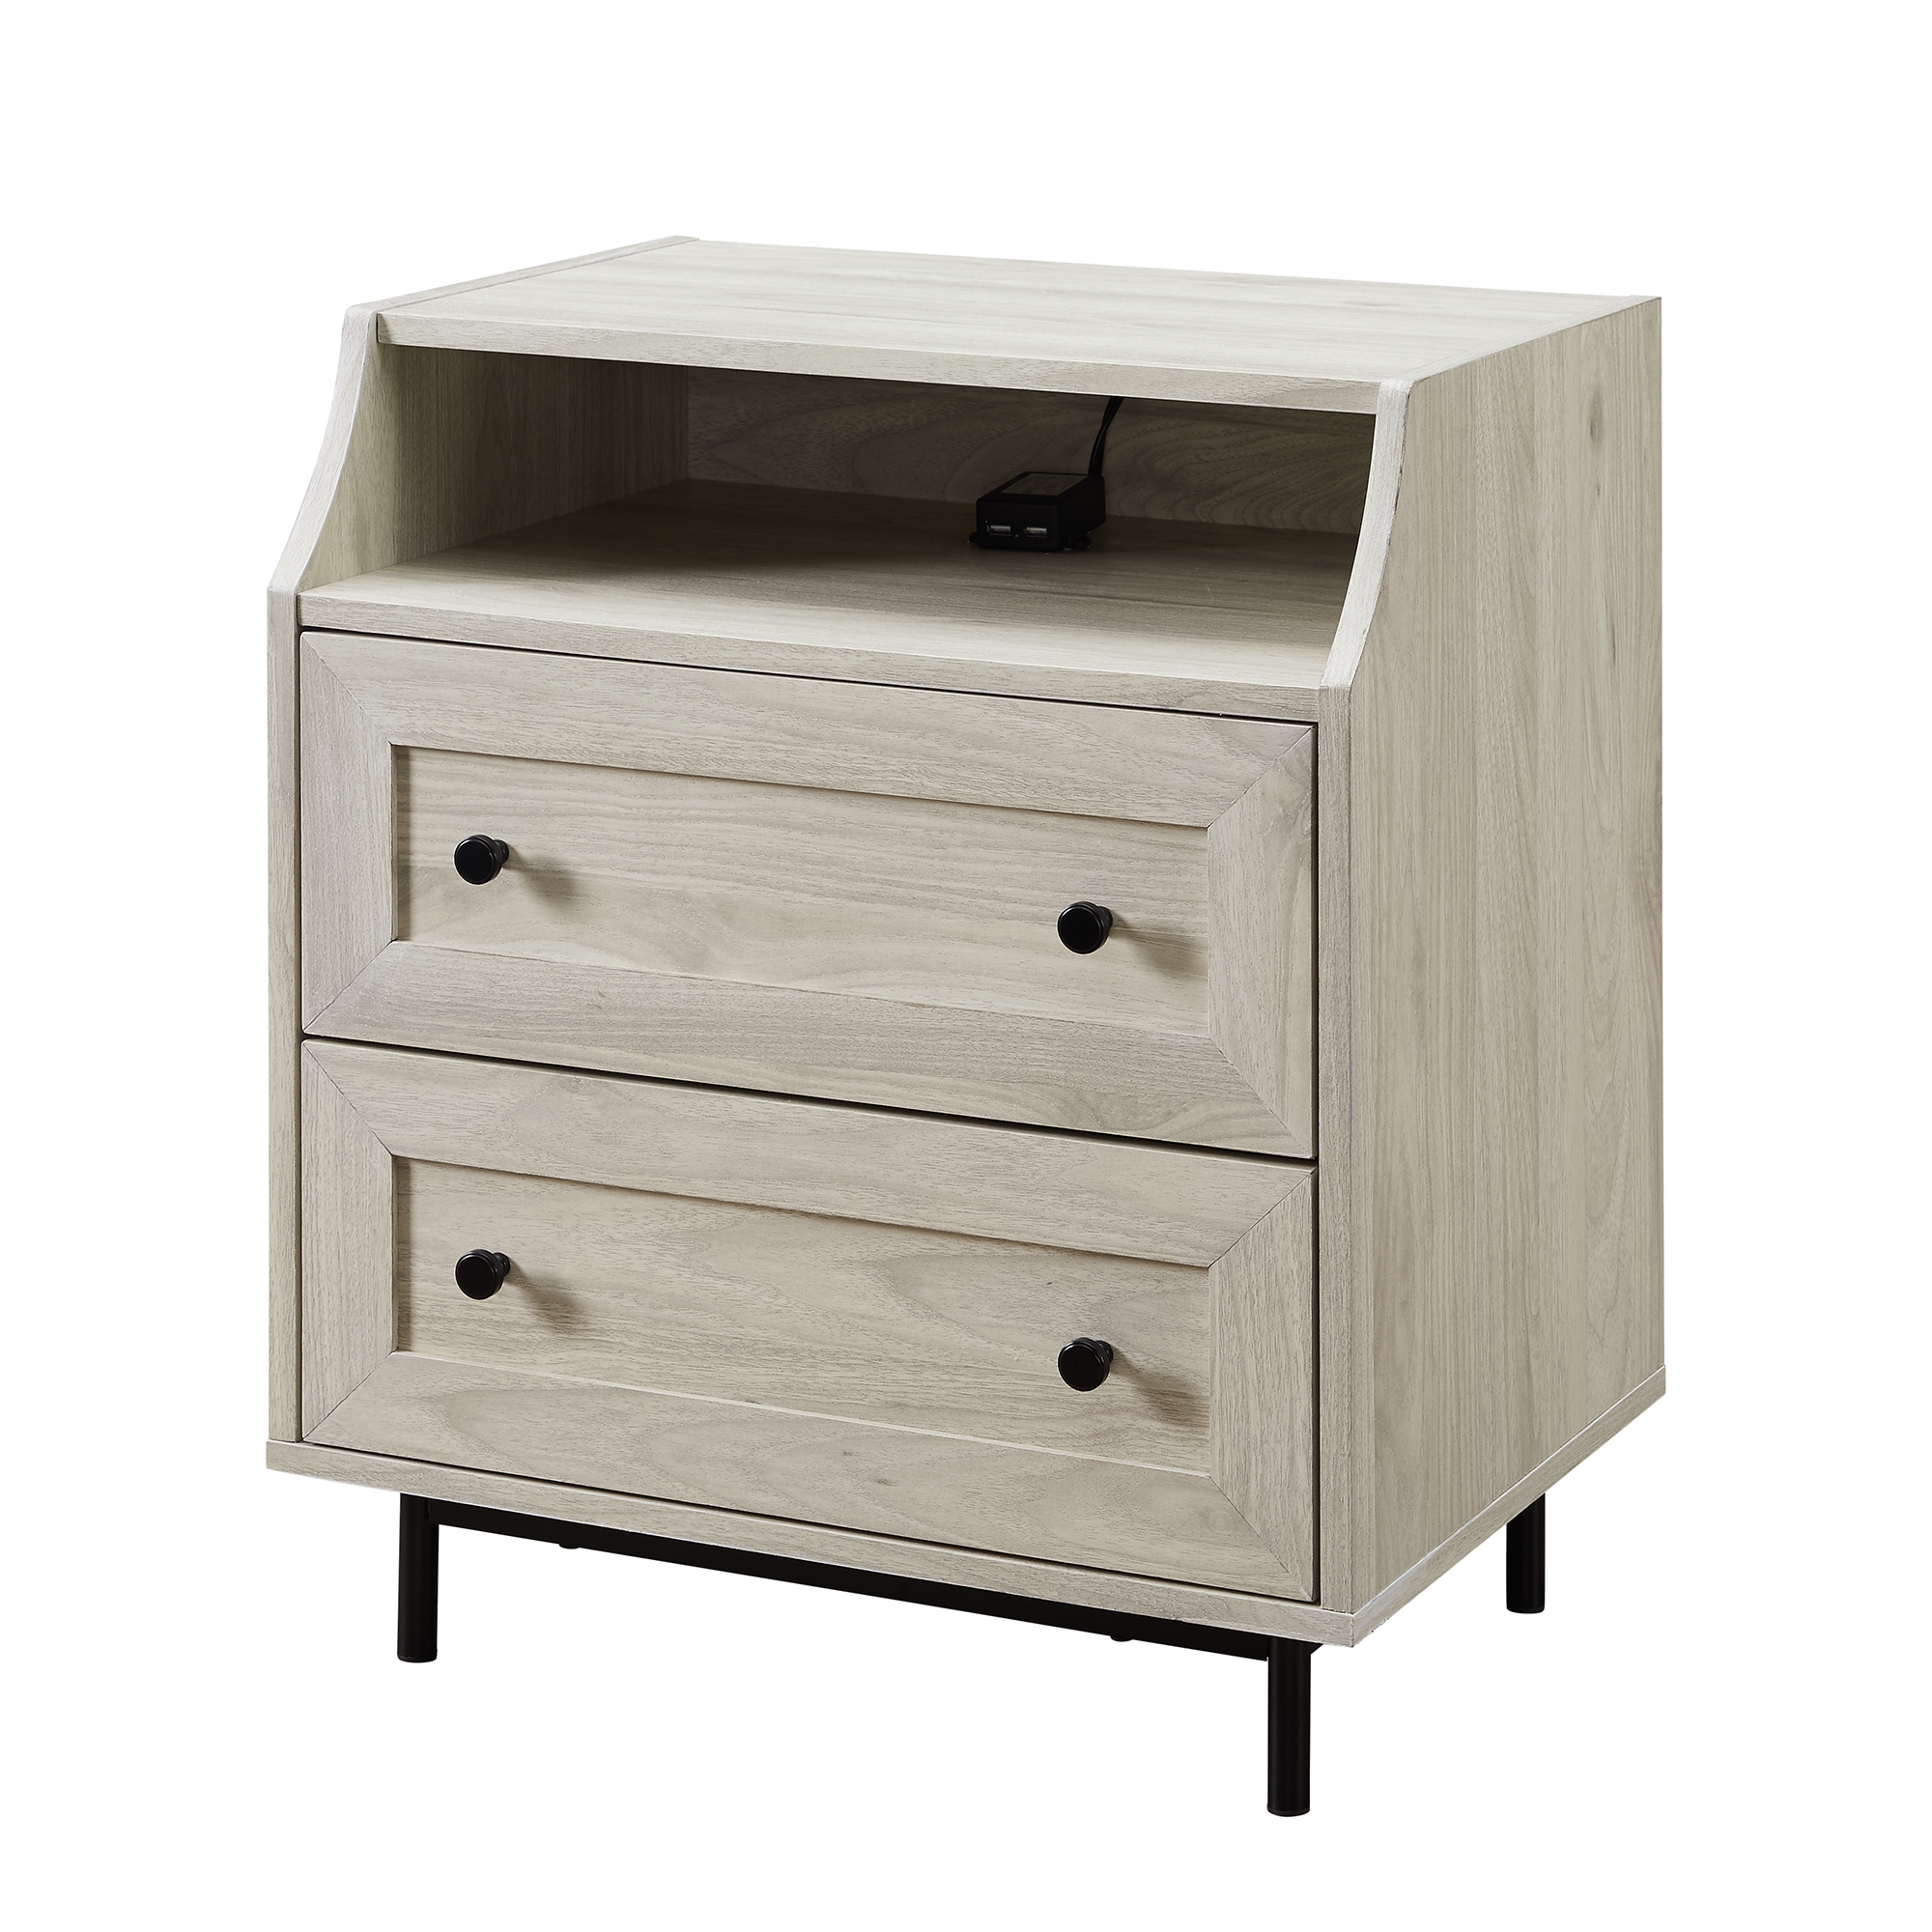 Welsh 22" Curved Open Top 2 Drawer Nightstand with USB - Birch - Image 3